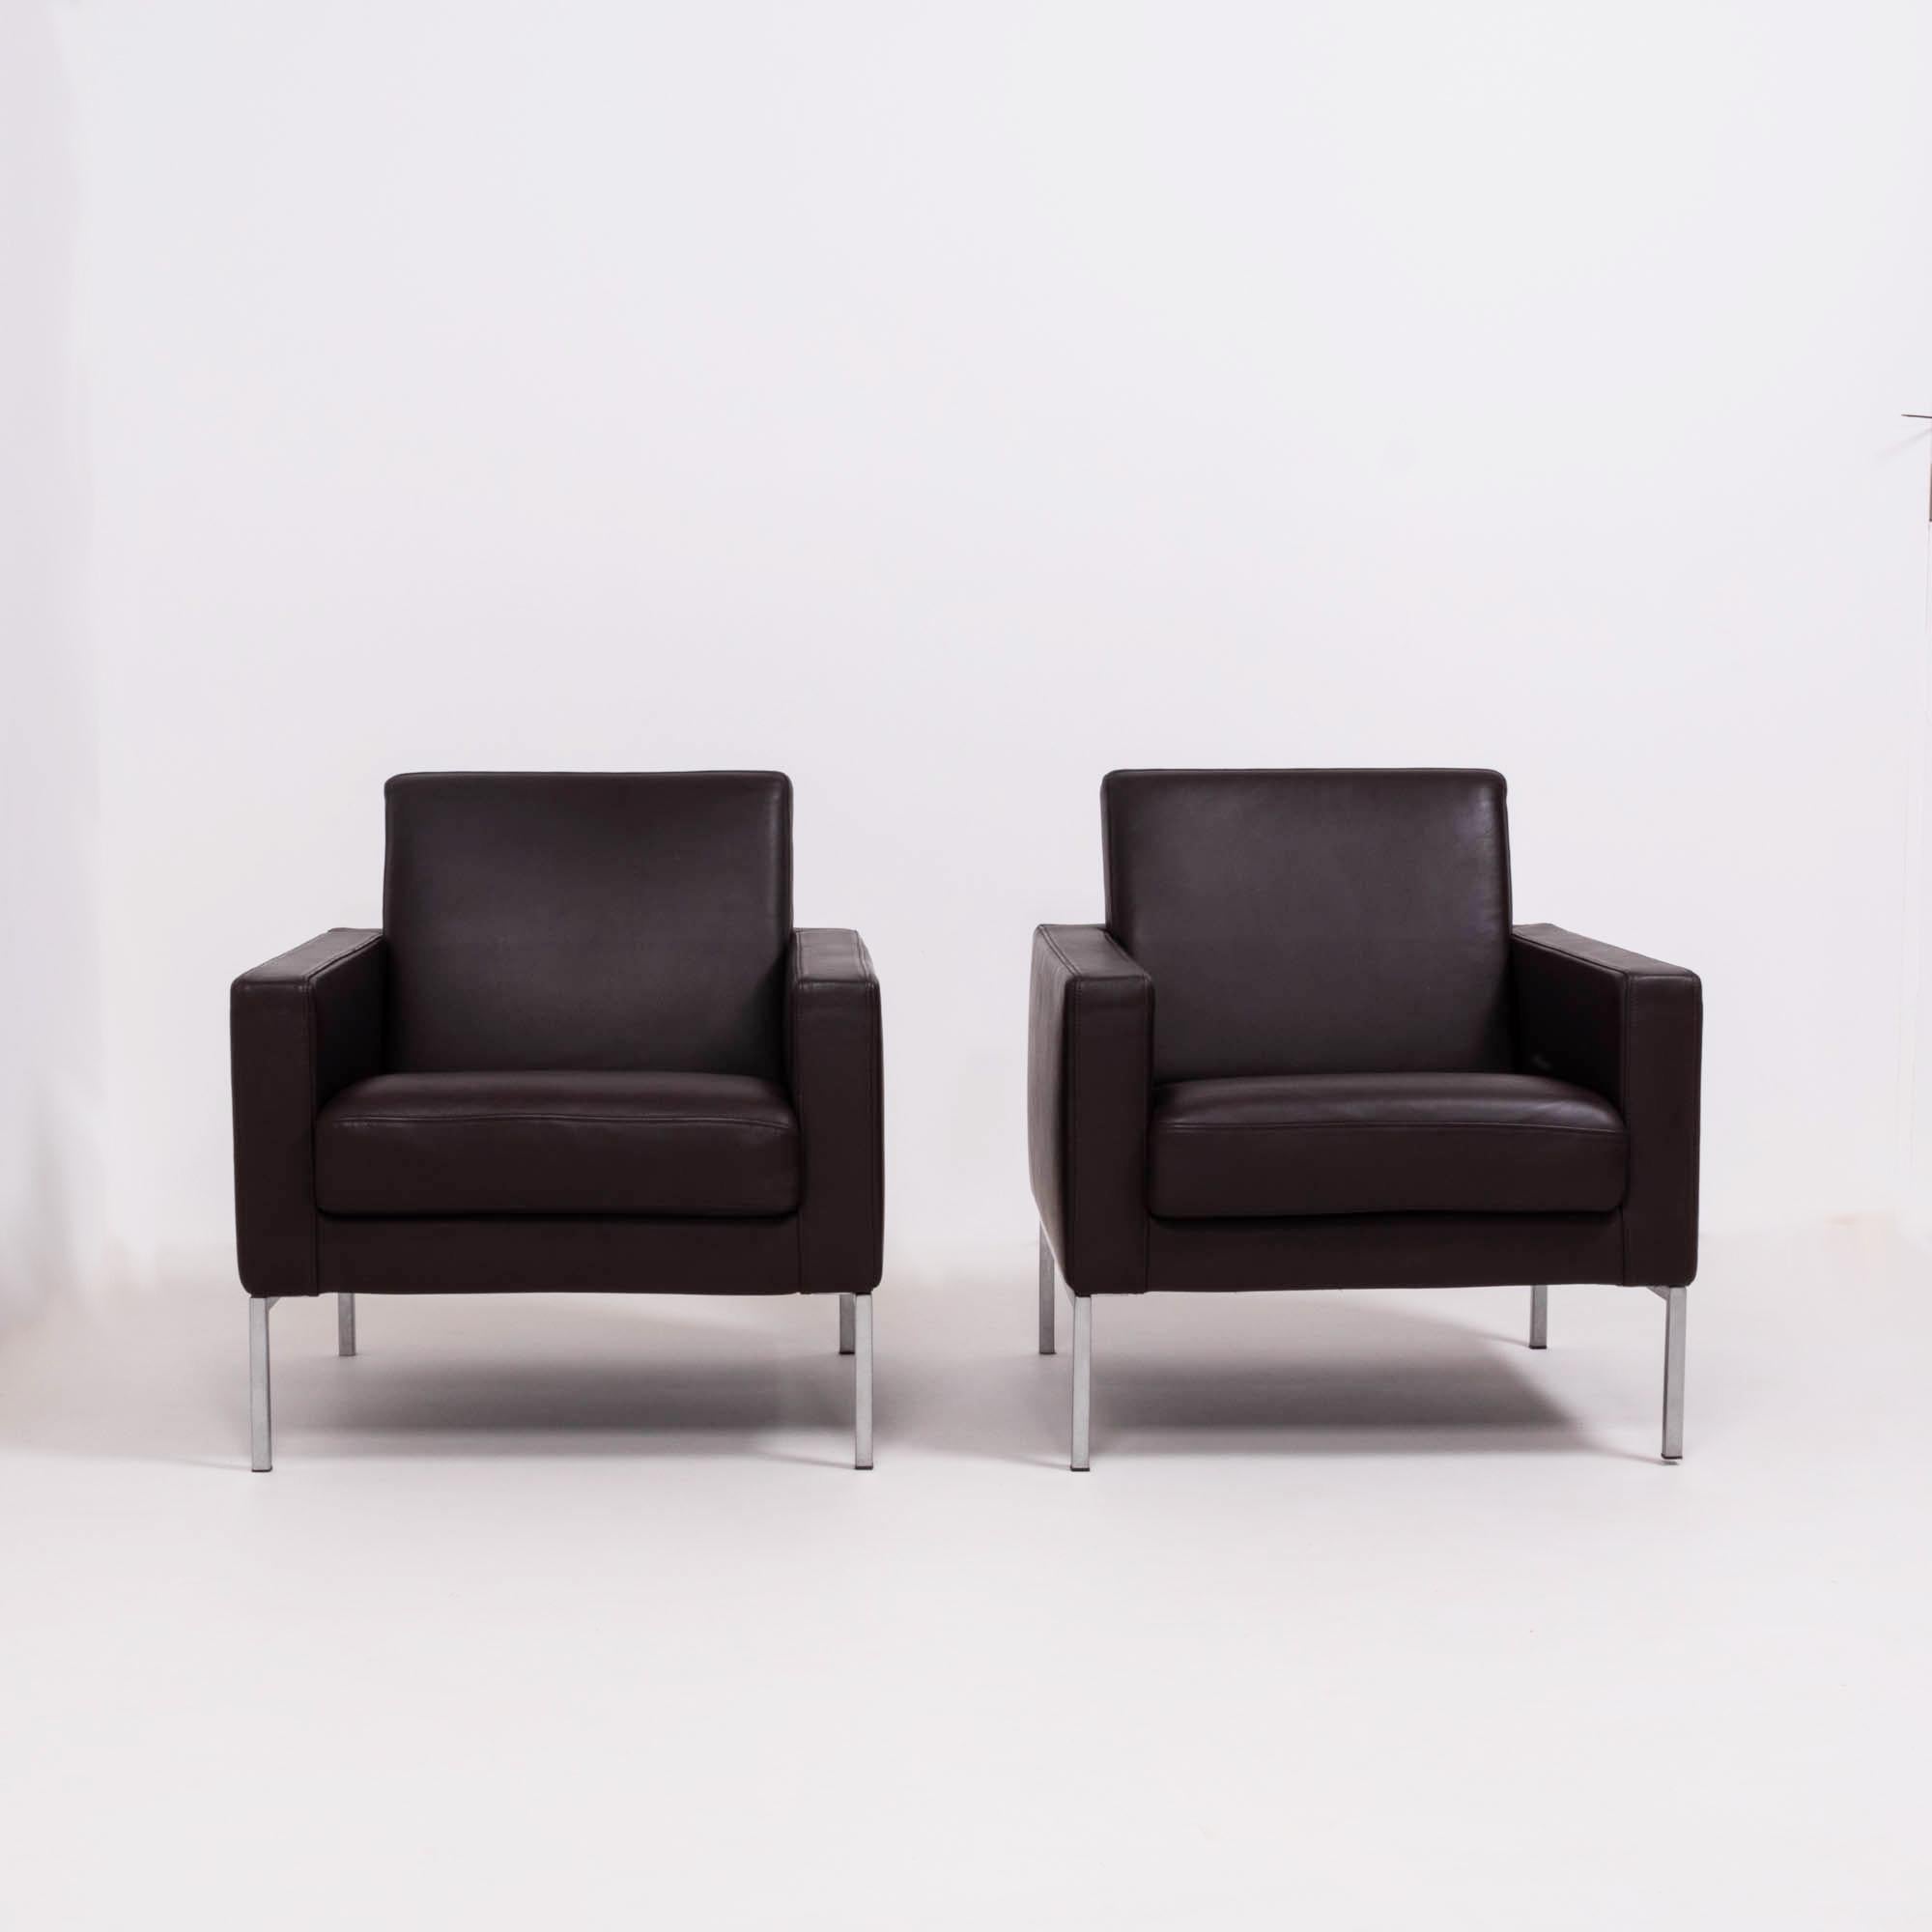 Walter Knoll Brown Leather Armchairs, Set of Two In Good Condition For Sale In London, GB